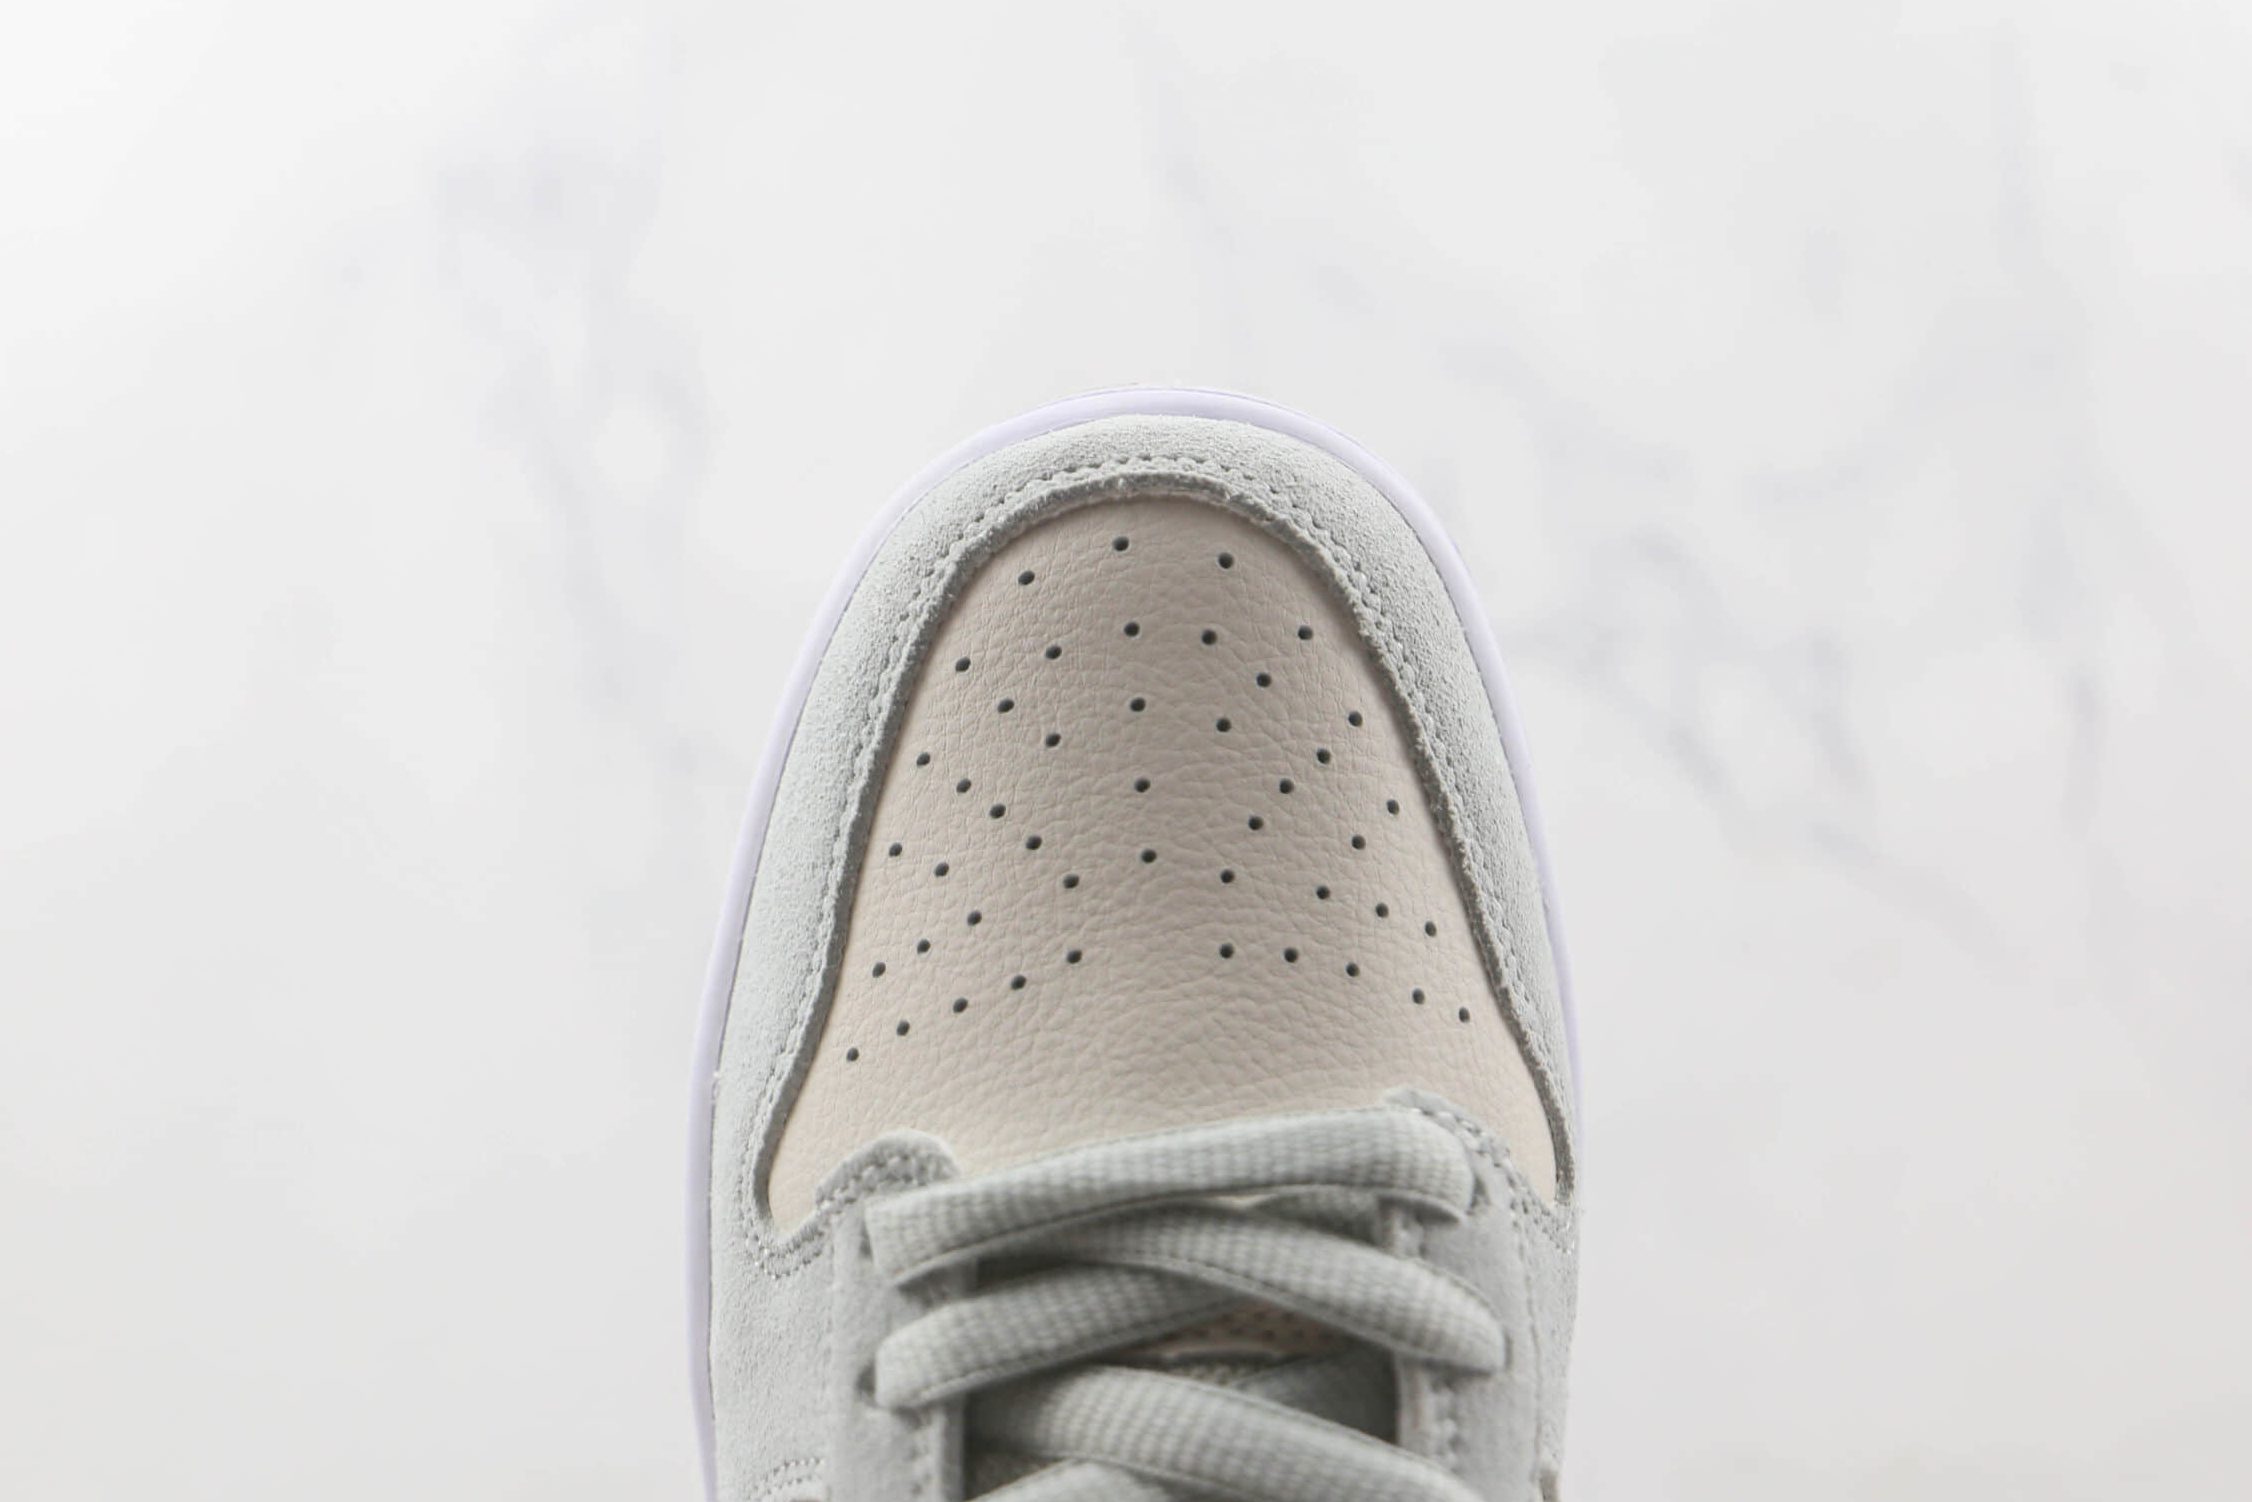 Nike SB Dunk Low PRM Light Grey White 316272-060 - Stylish and Versatile Sneakers for Every Occasion